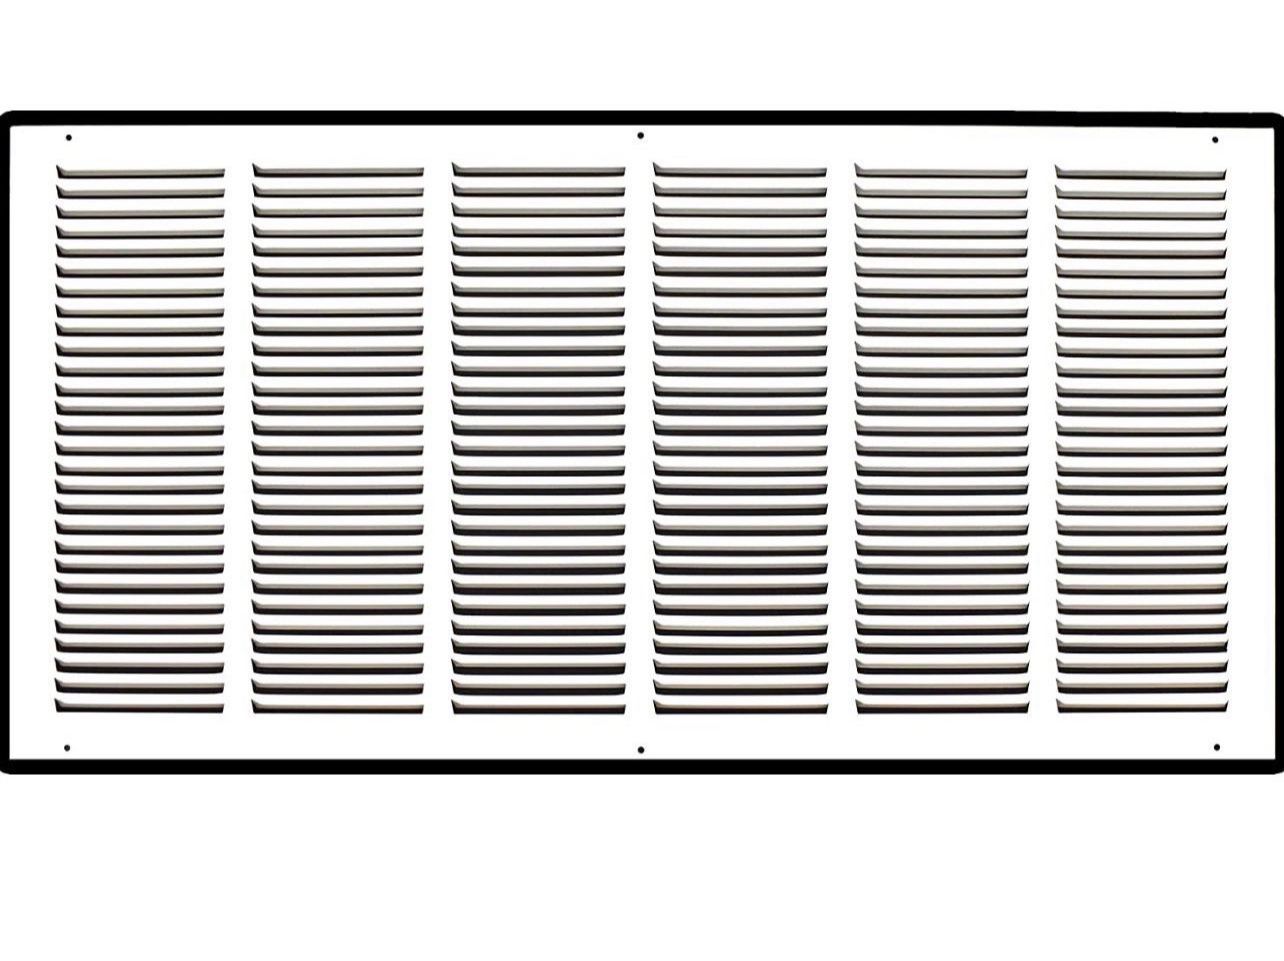 Handua 30"W x 14"H [Duct Opening Size] Steel Return Air Grille | Vent Cover Grill for Sidewall and Ceiling, White